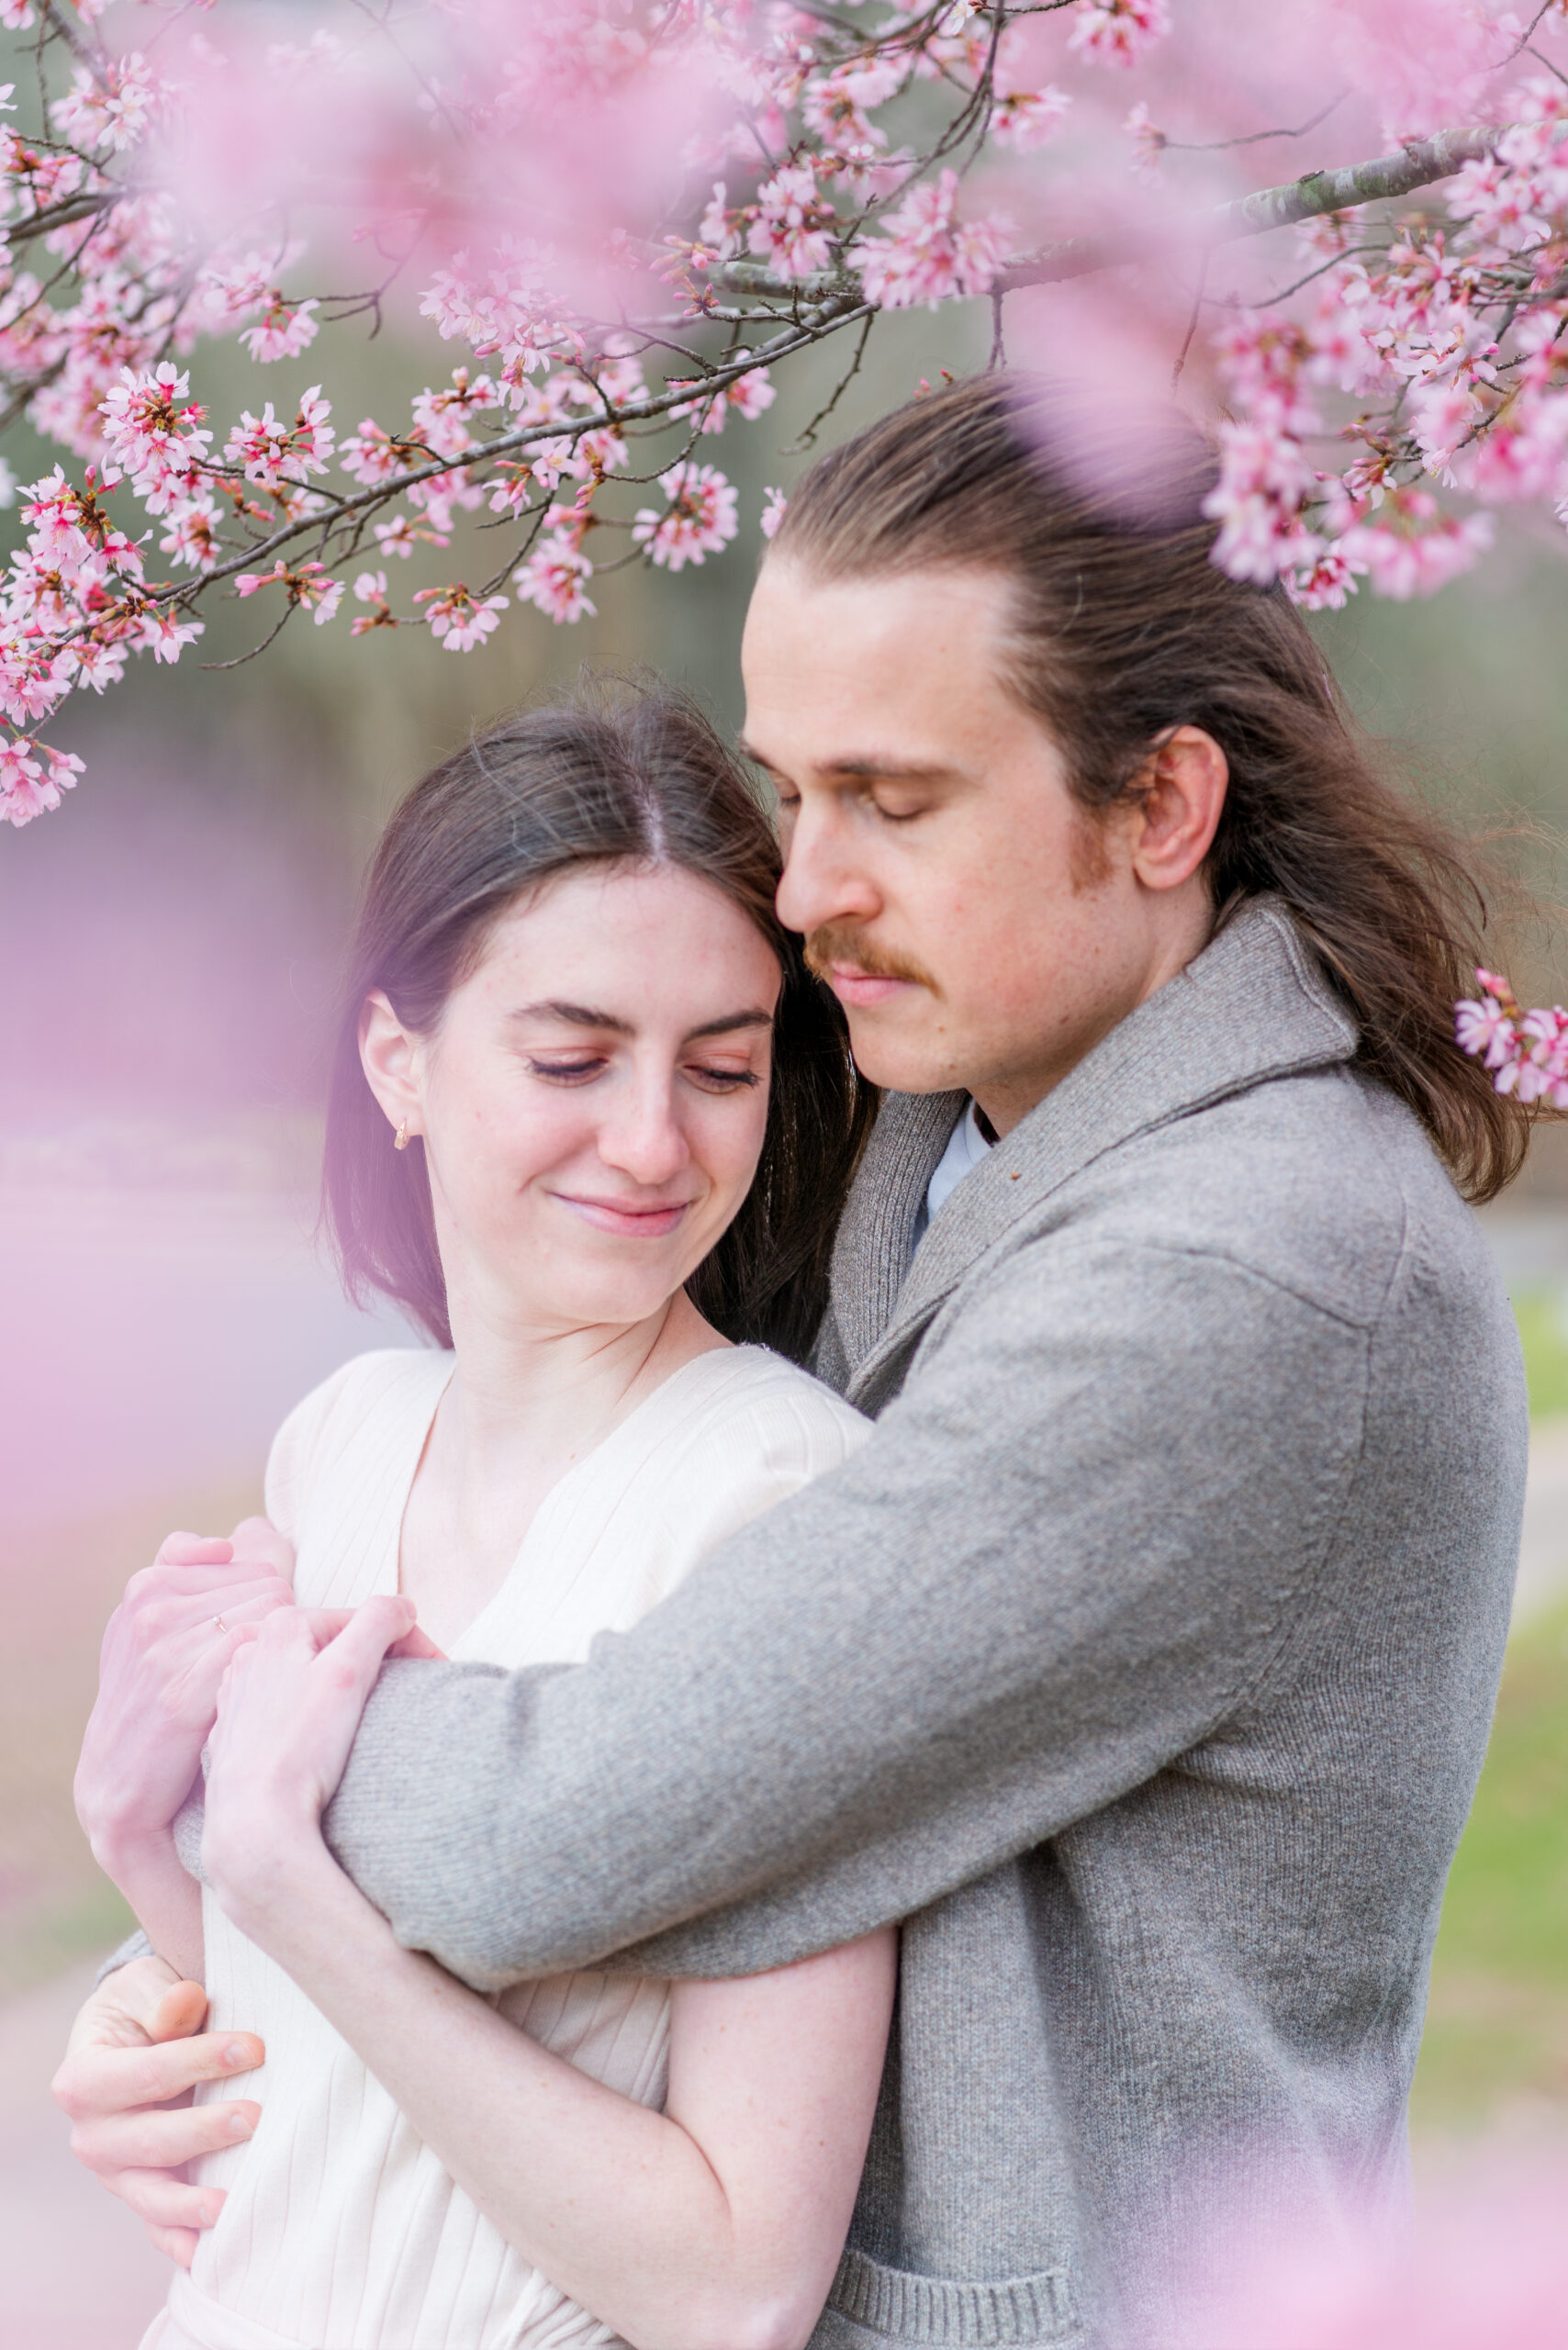 Couple Noelle and Hayden Hug each other amongst the pale pink blossoms of the cherry trees.